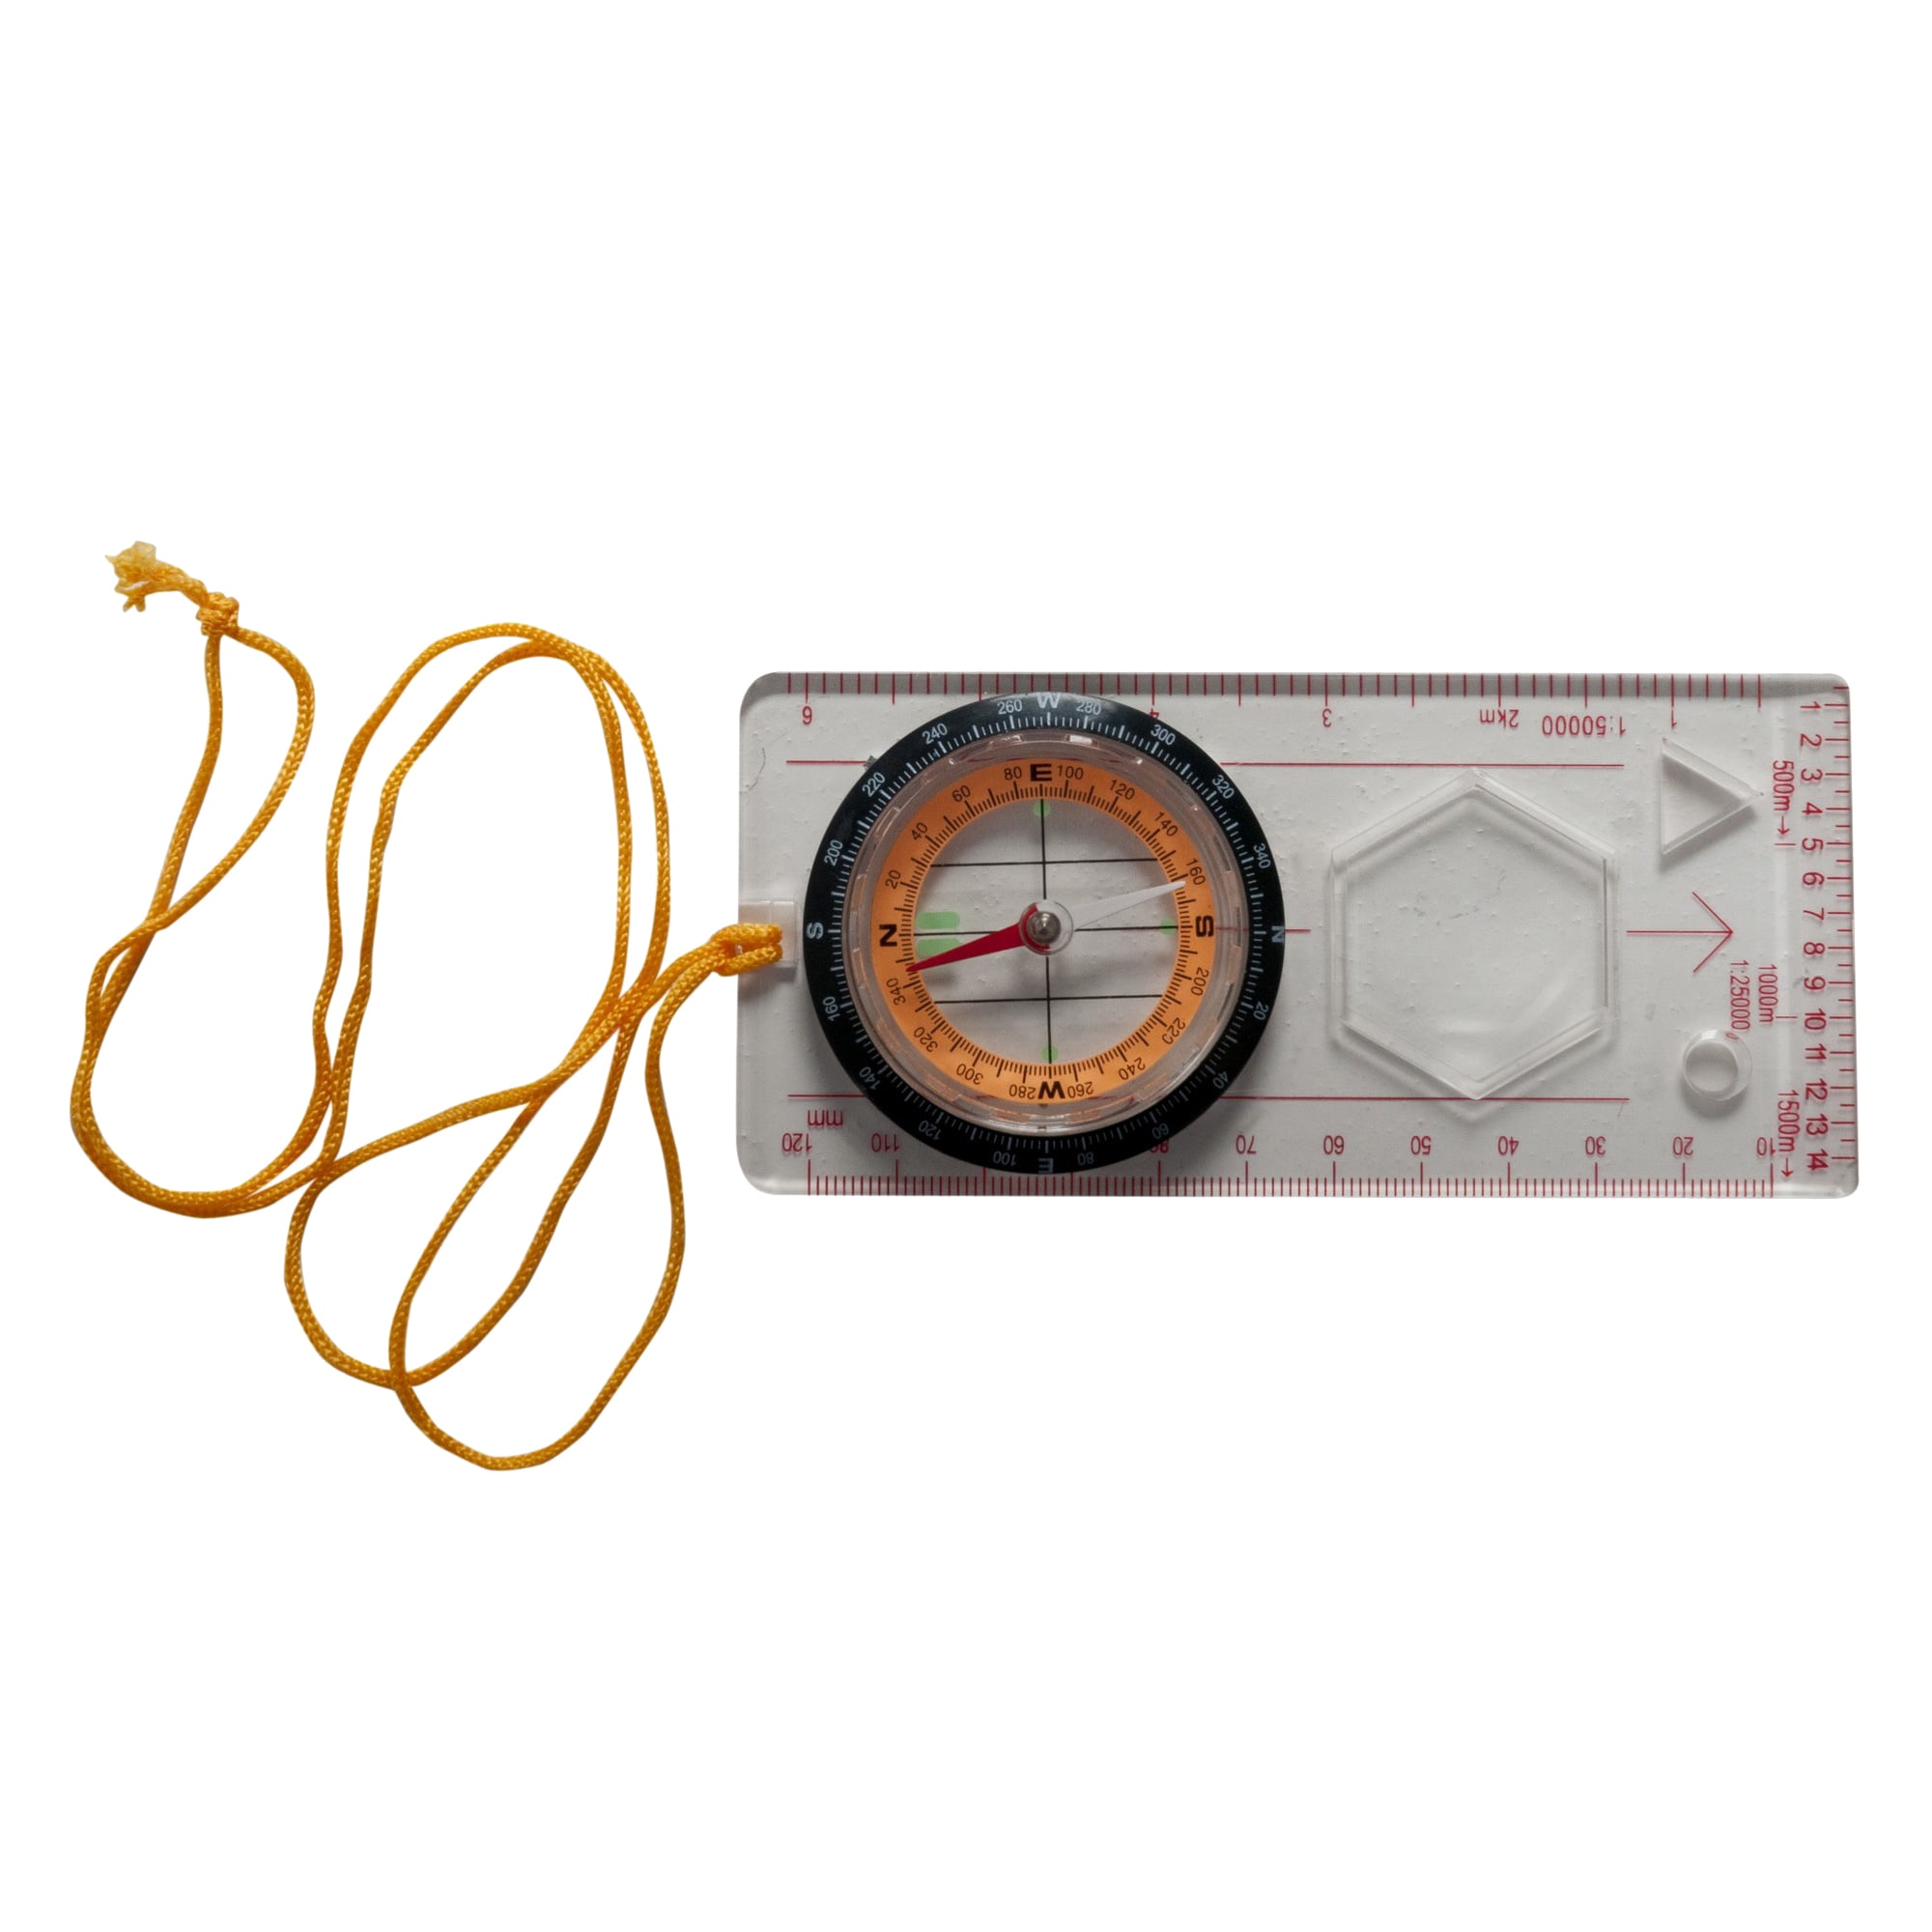 12x 15mm mini compasses portable handheld outdoor emergency survival compass Pip 